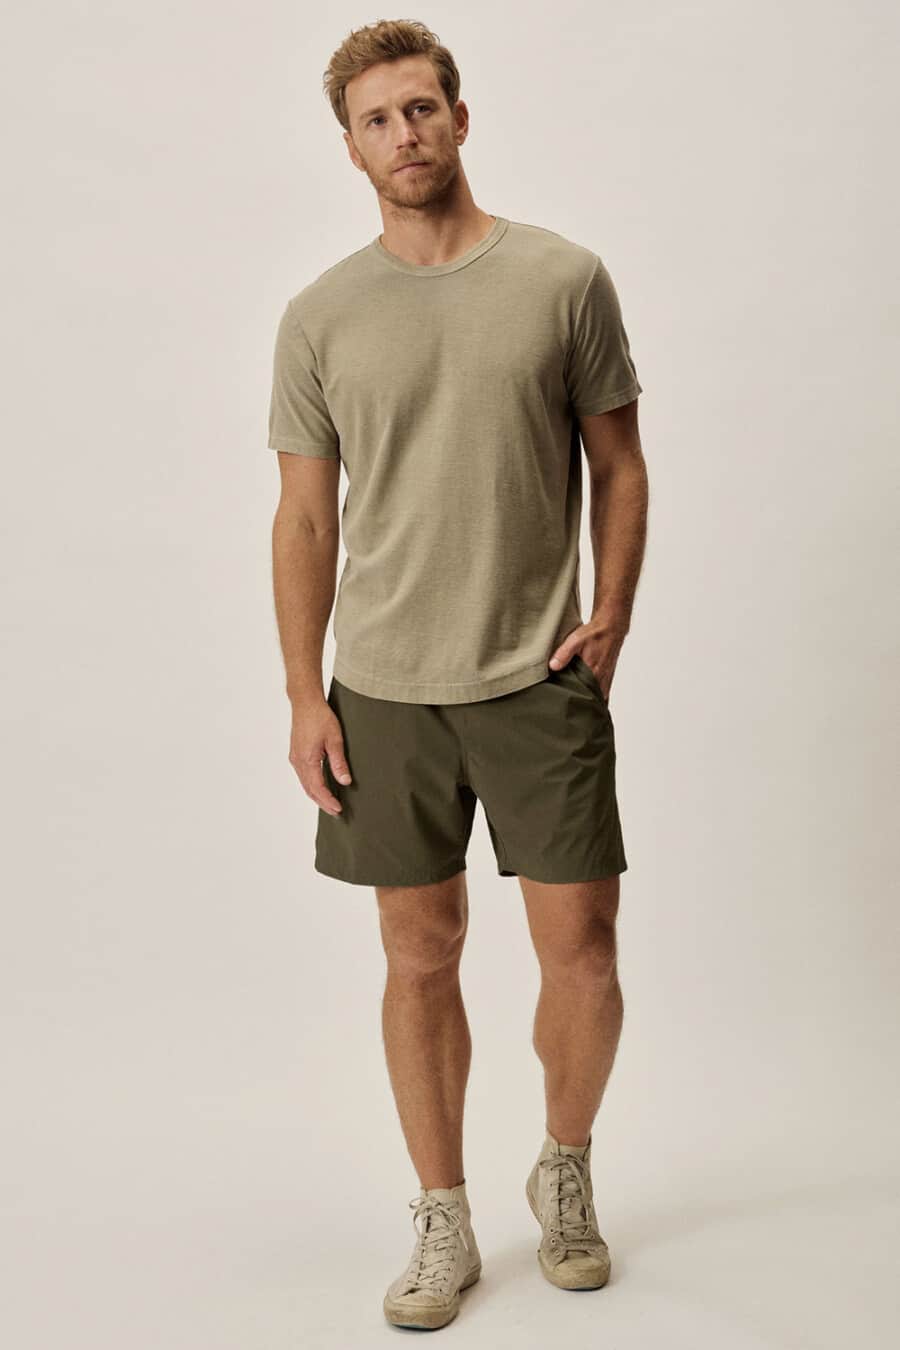 Men's dark green shorts, olive green T-shirt and canvas high-top sneakers outfit